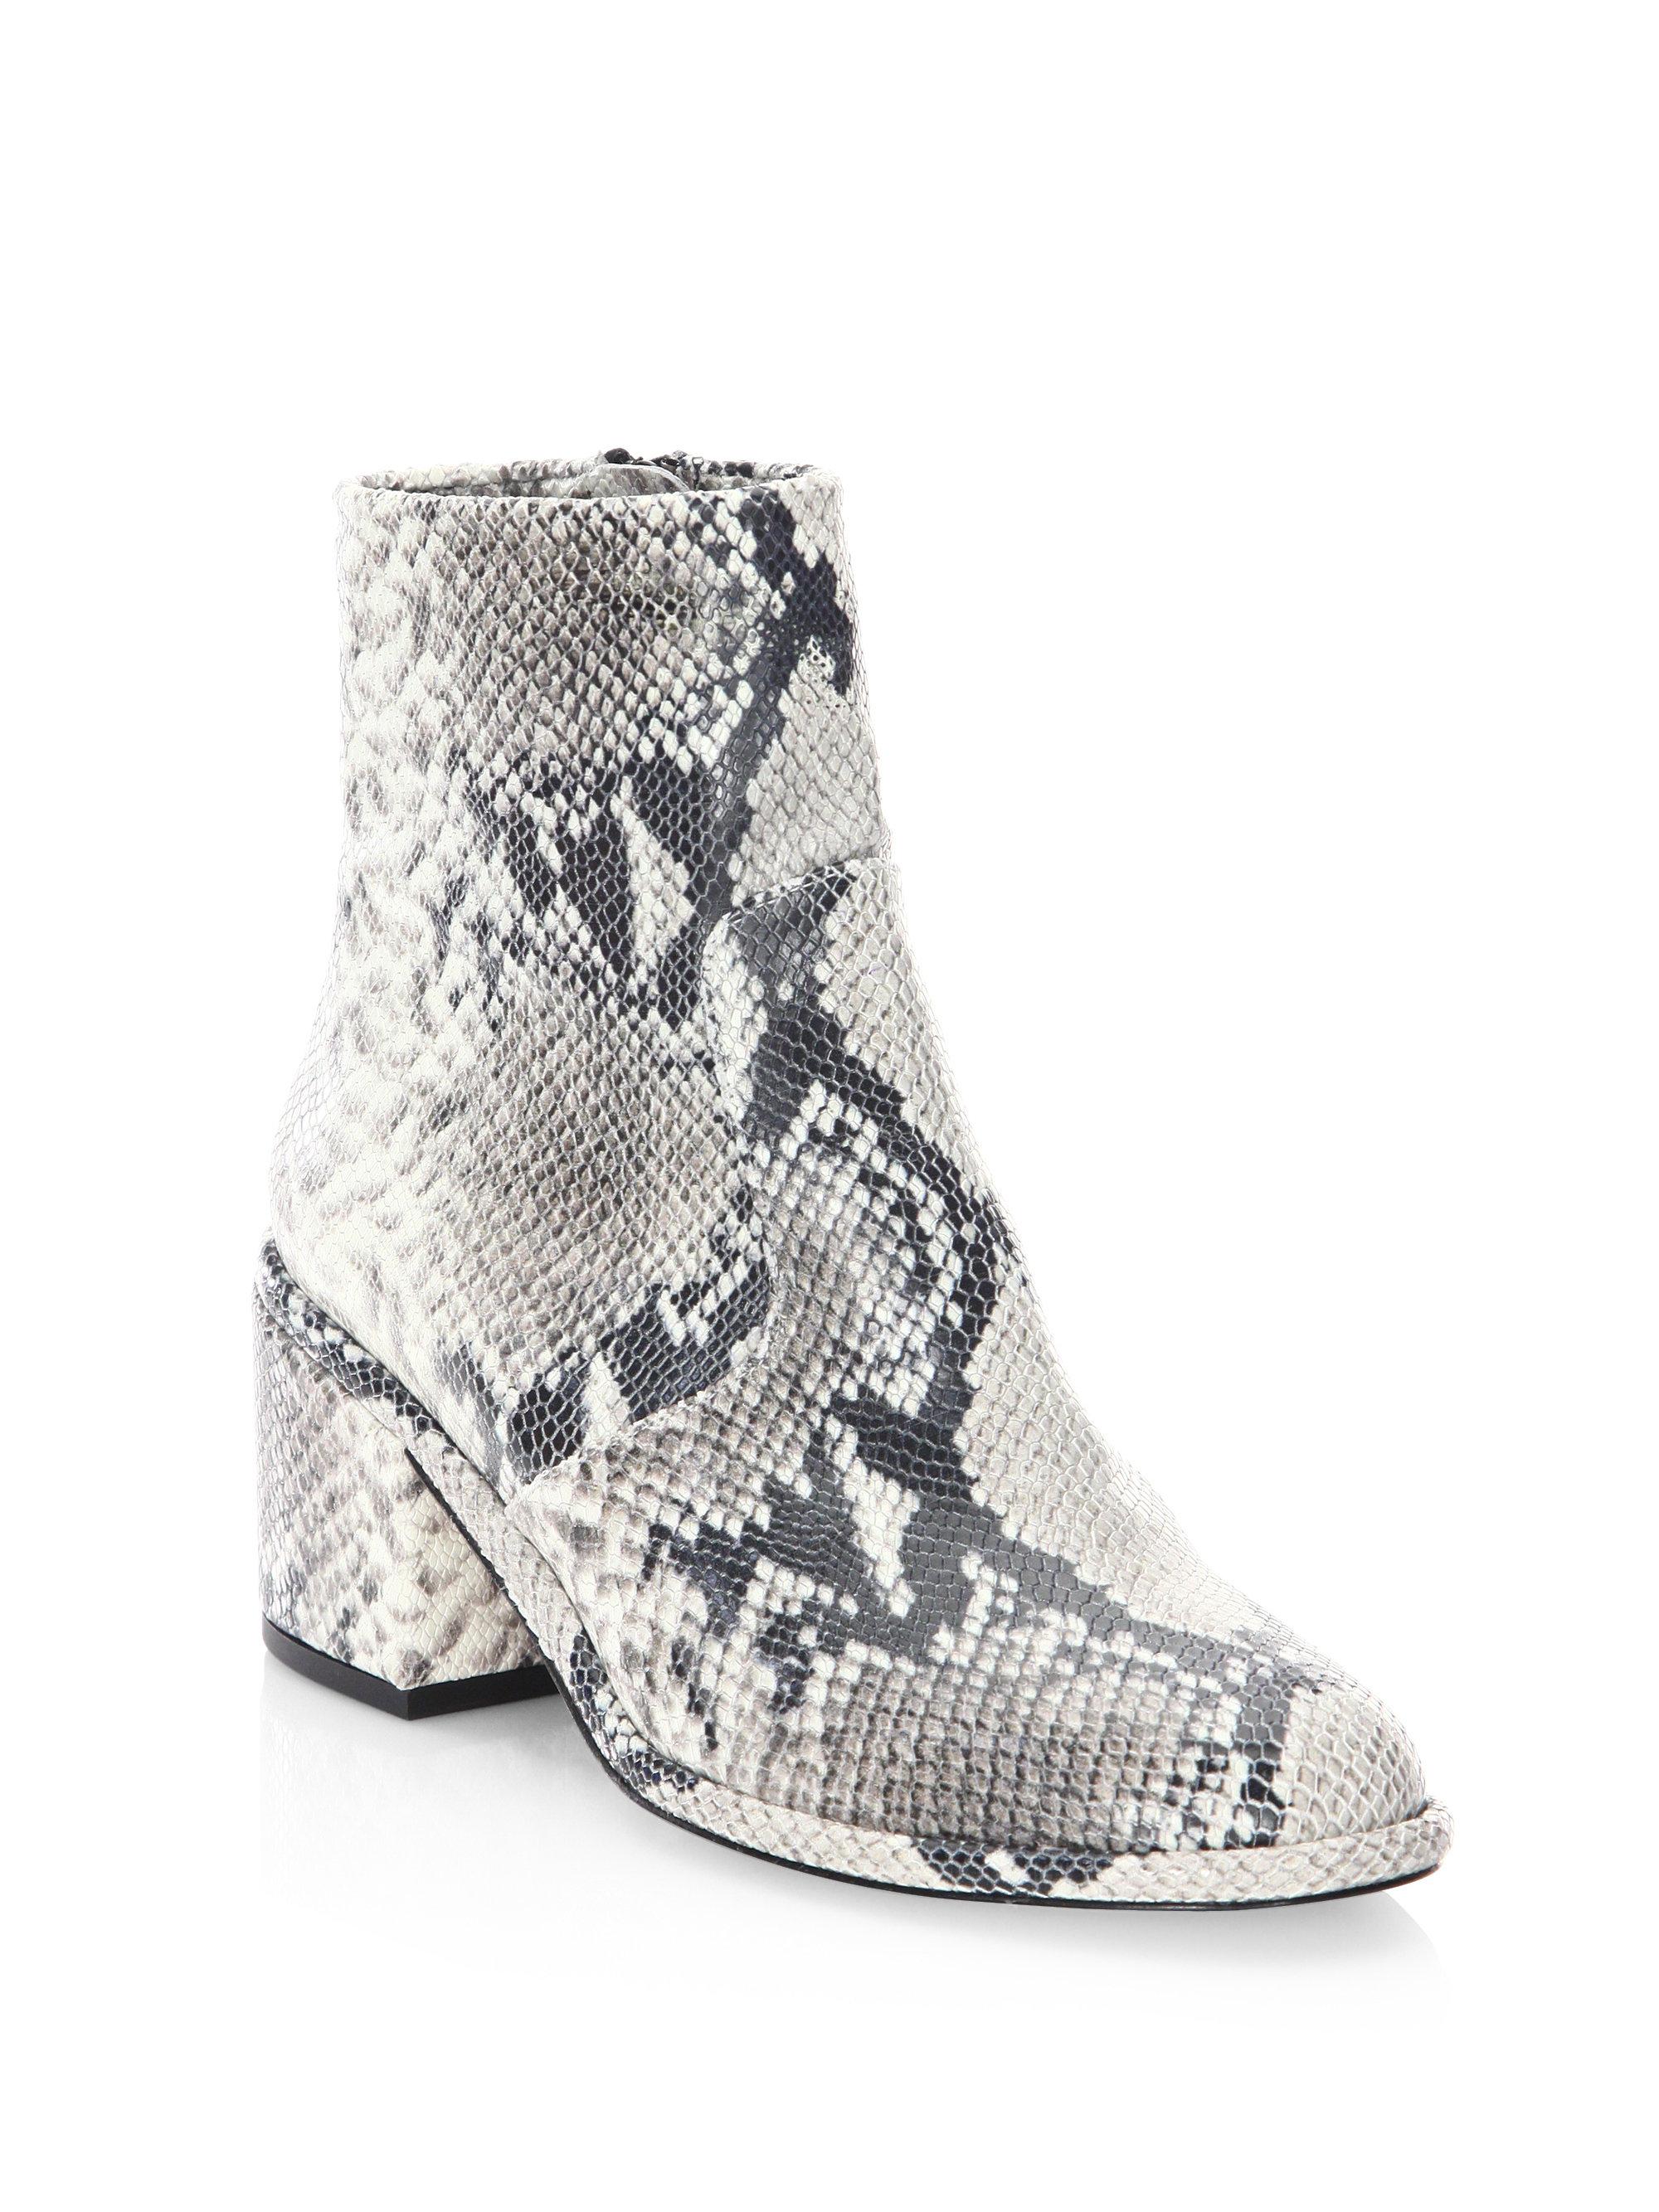 black and white snakeskin booties